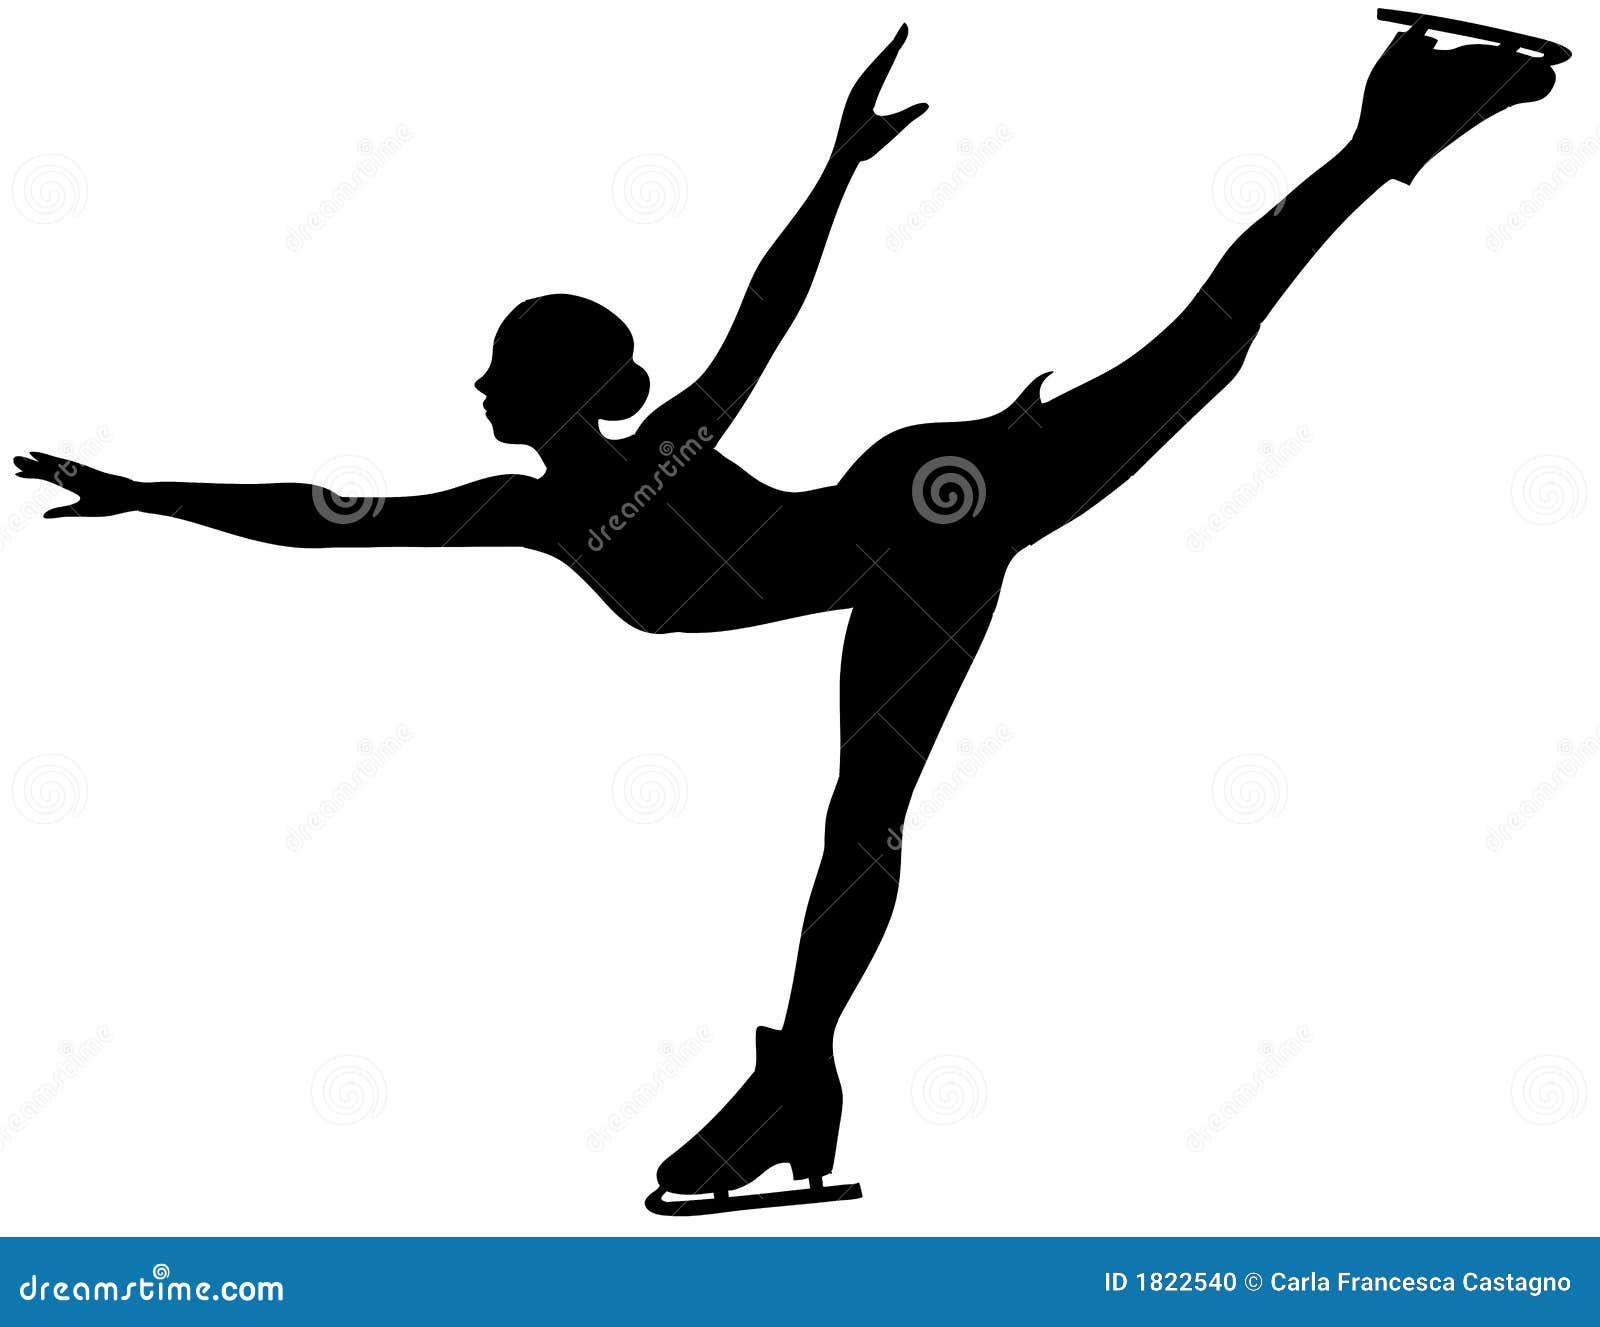 ice skater silhouette - woman